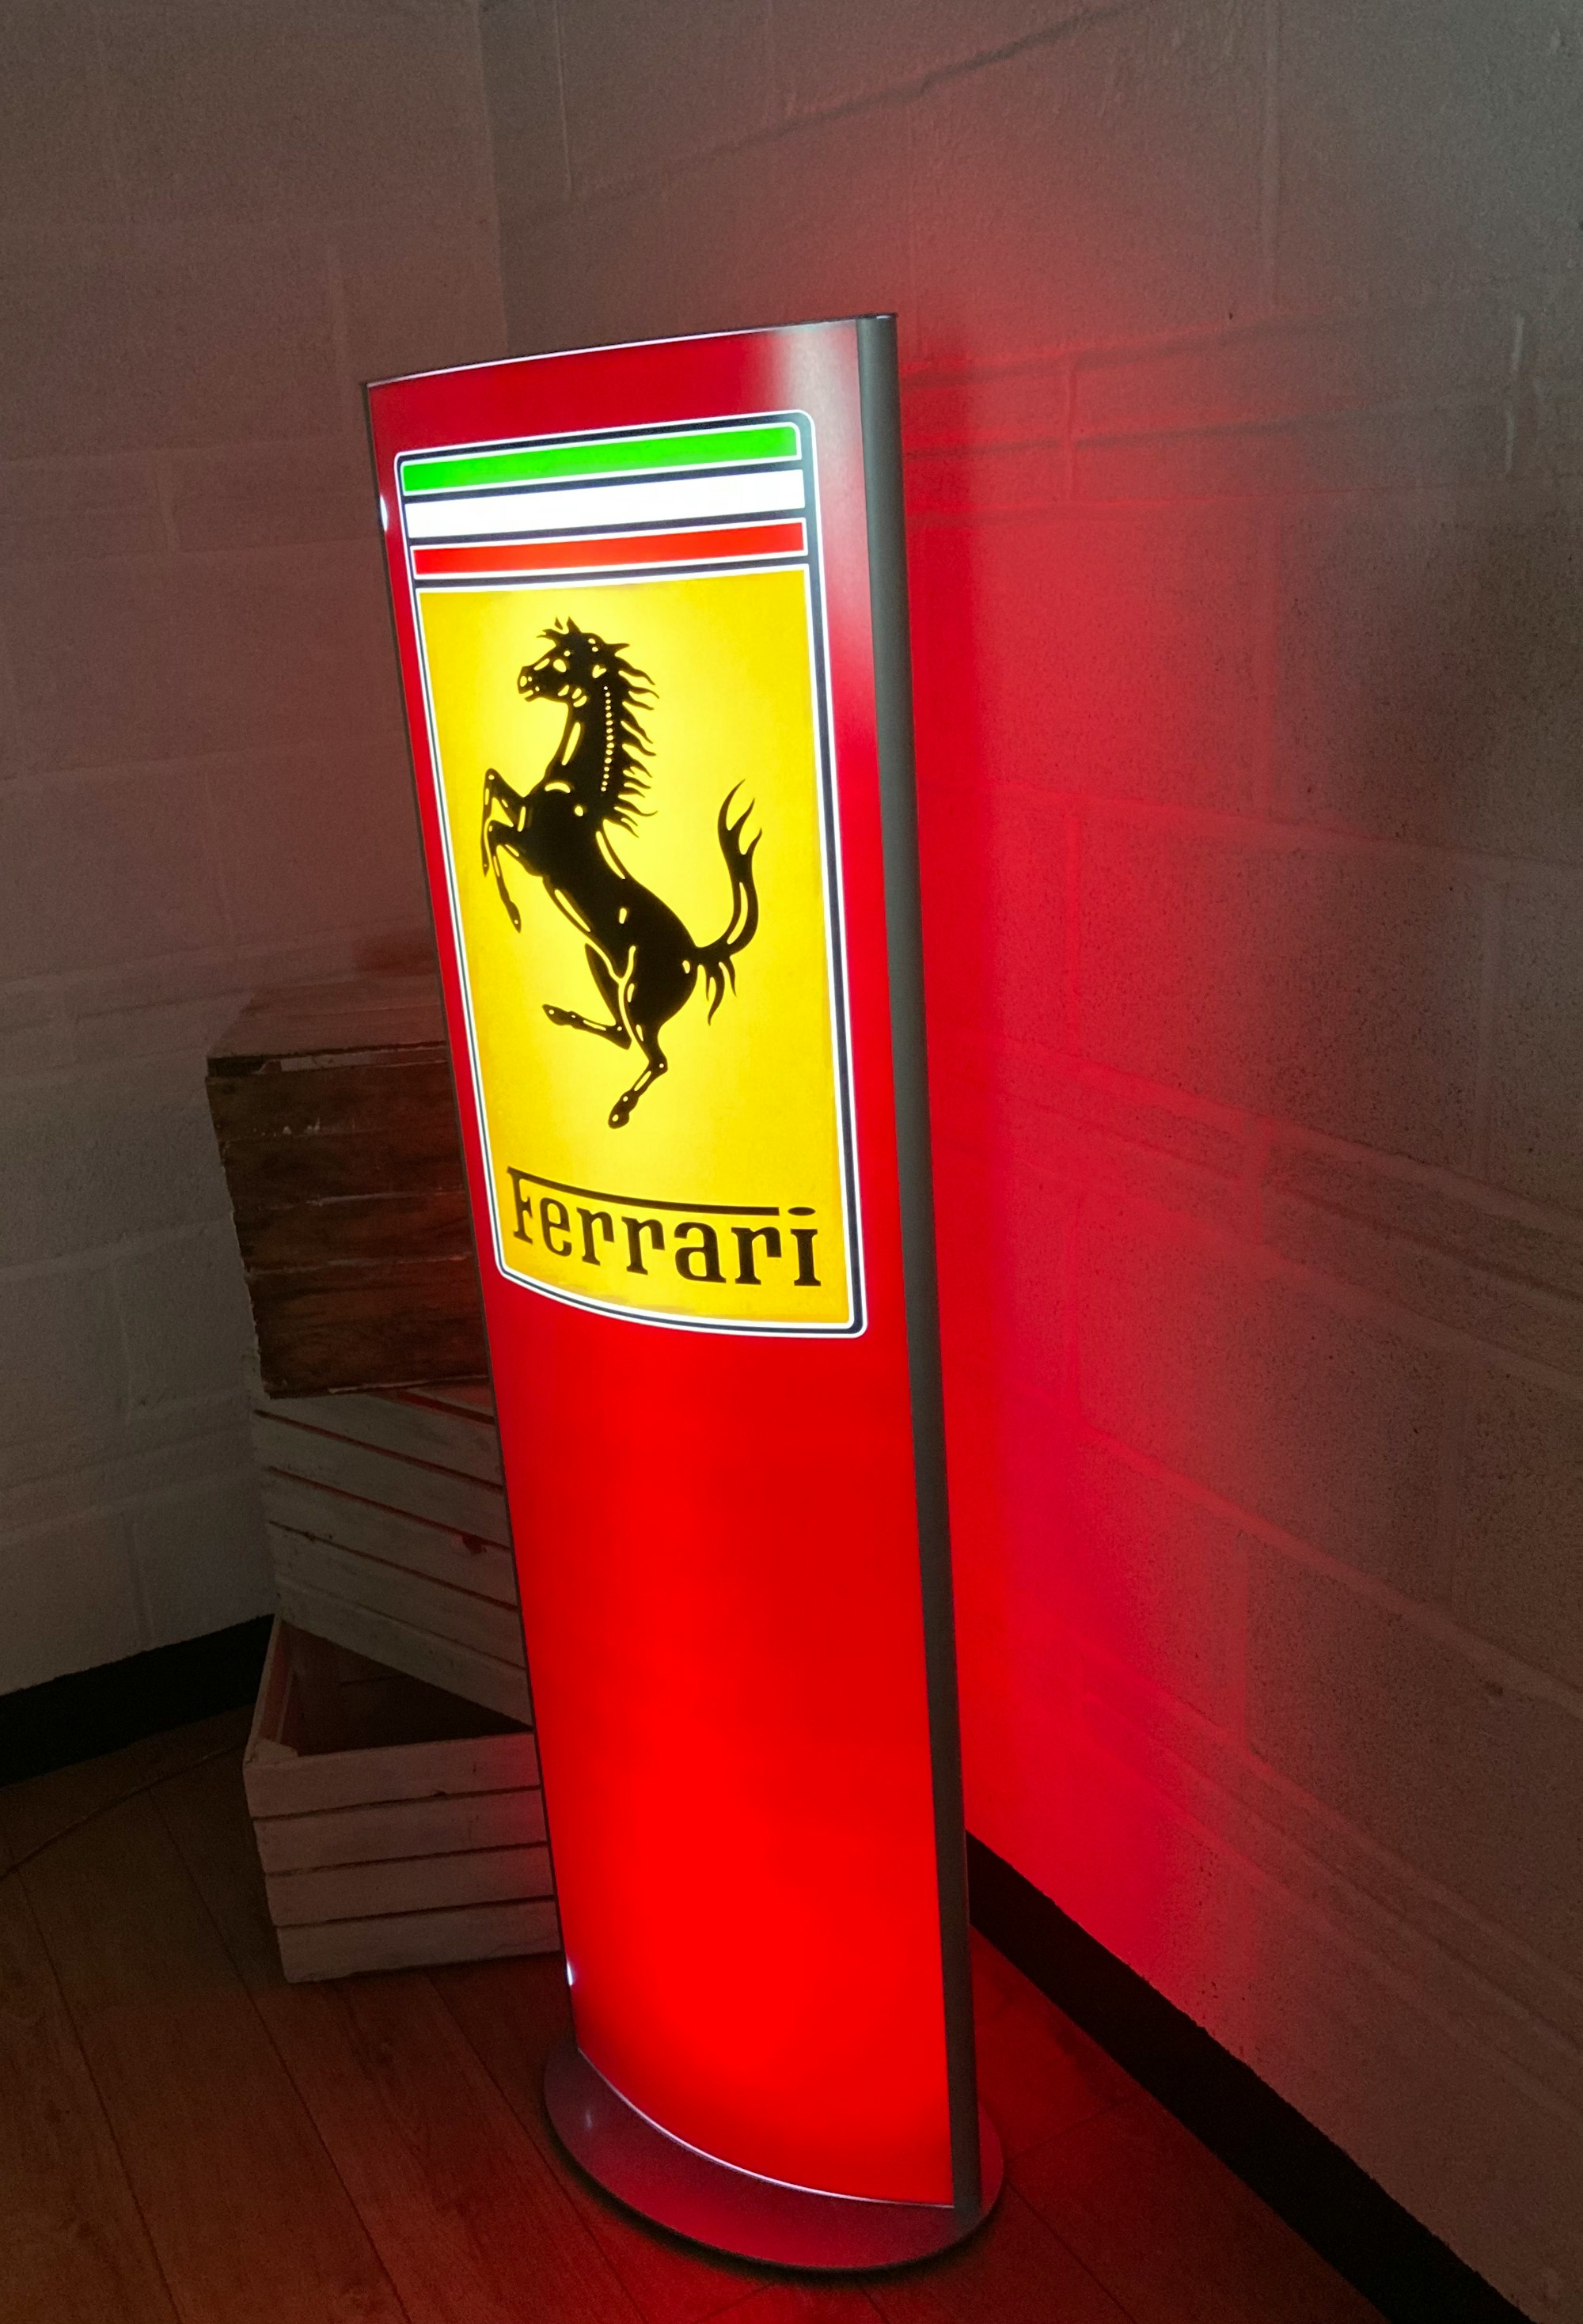 FERRARI ILLUMINATED STAND for sale by auction in Glastonbury